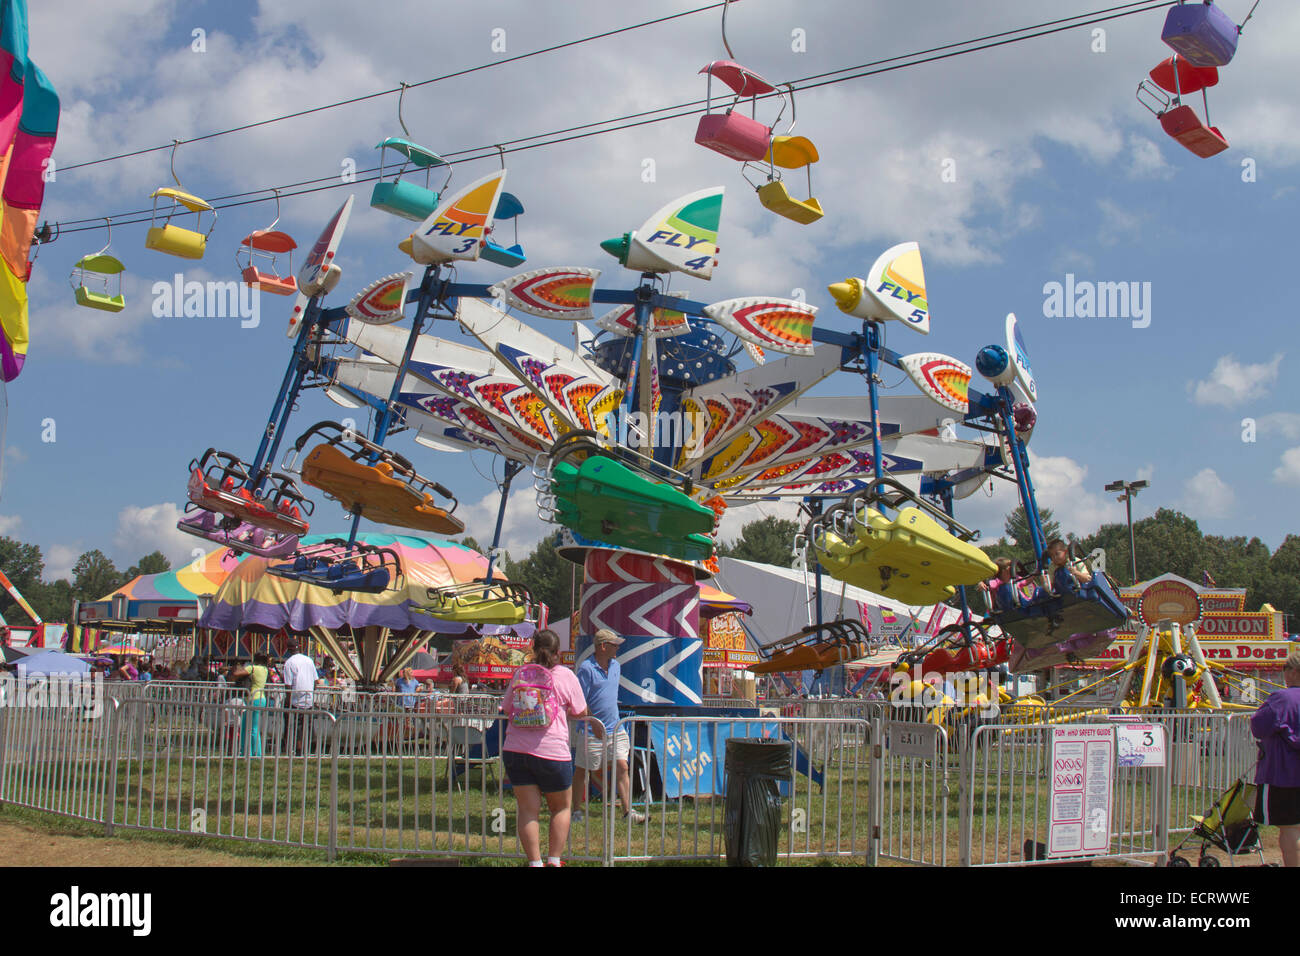 People enjoy the colorful, wild rides at the state fair Stock Photo